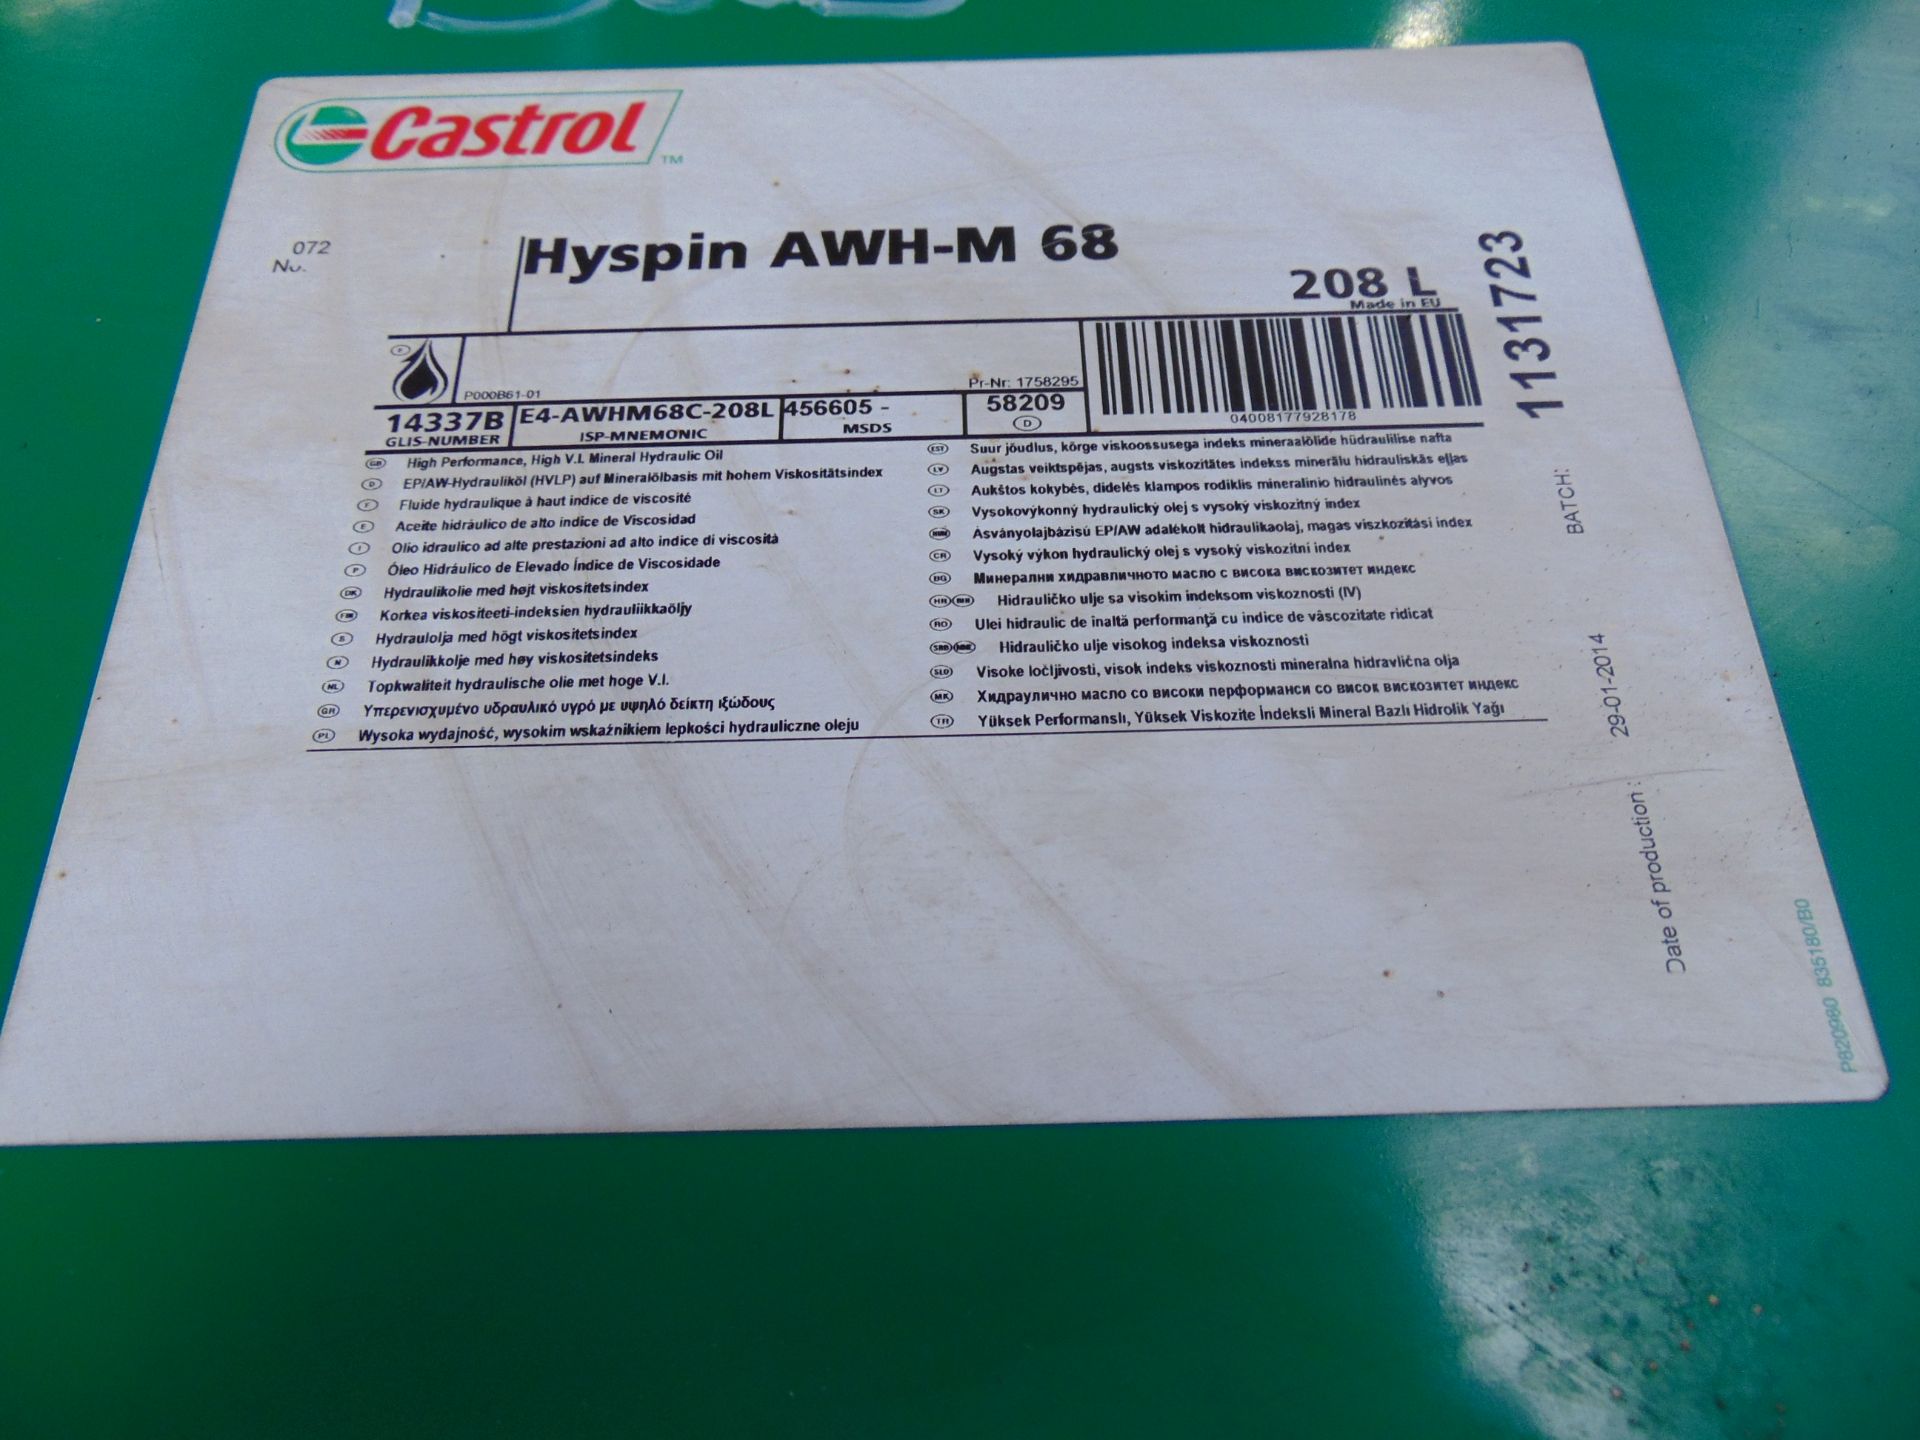 1 x Unissued 208L Drum of Castrol Hyspin AWH-M 68 Hydraulic Oil - Image 5 of 6